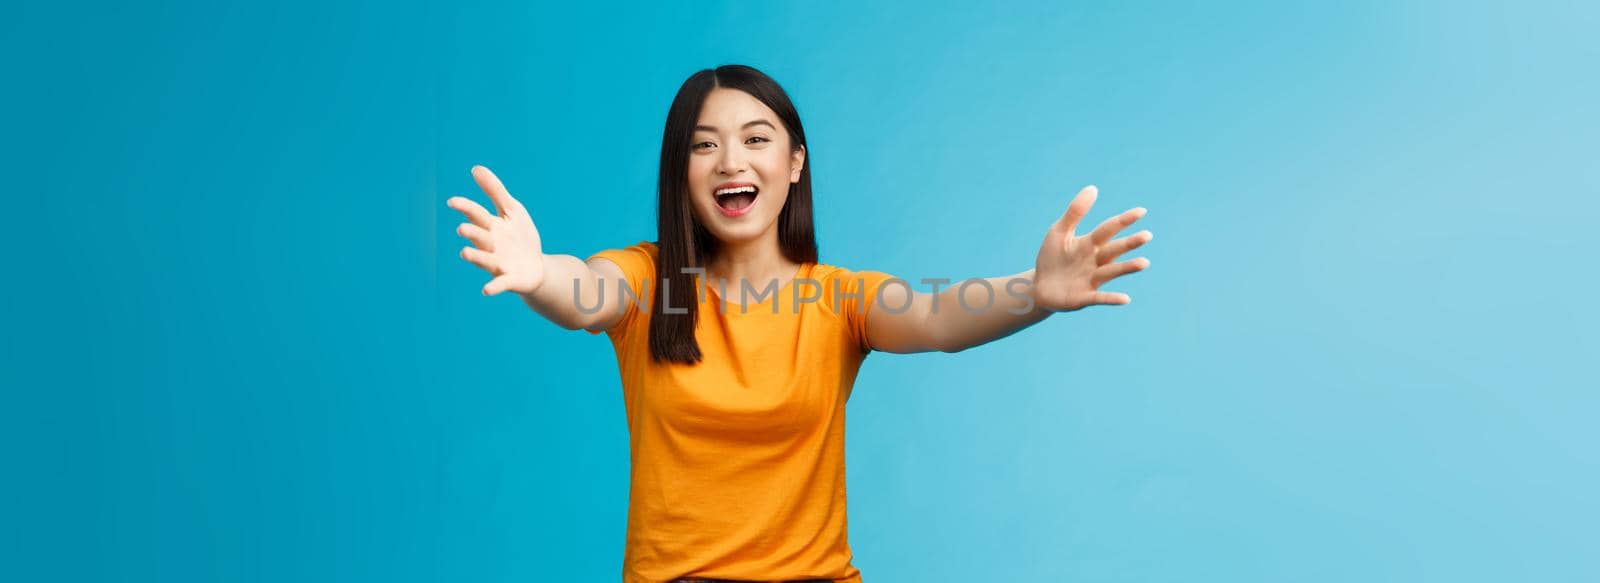 Come closer let me hug you. Cheerful lovely asian brunette girl stretch hands forward wanna cuddle, embracing friend smiling broadly inviting dear guests welcoming, stand blue background.